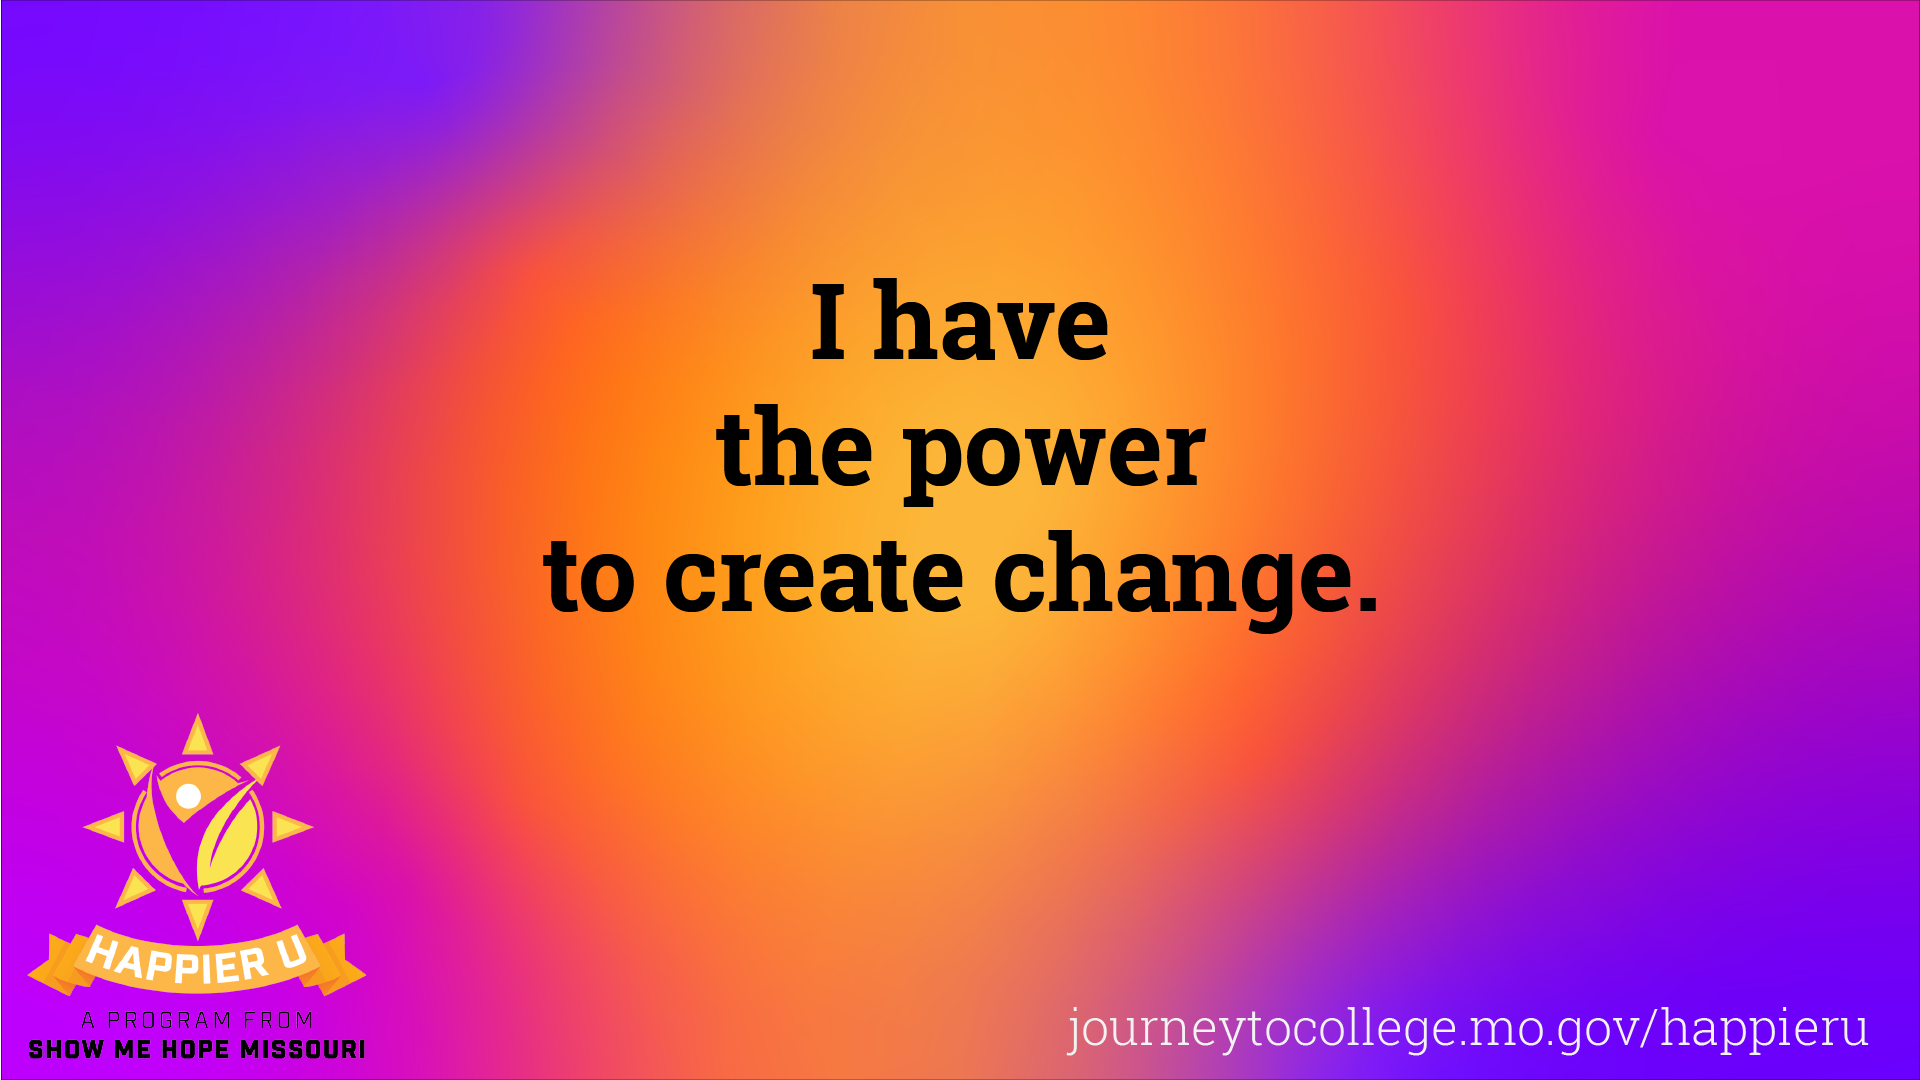 "I have the power to create change"